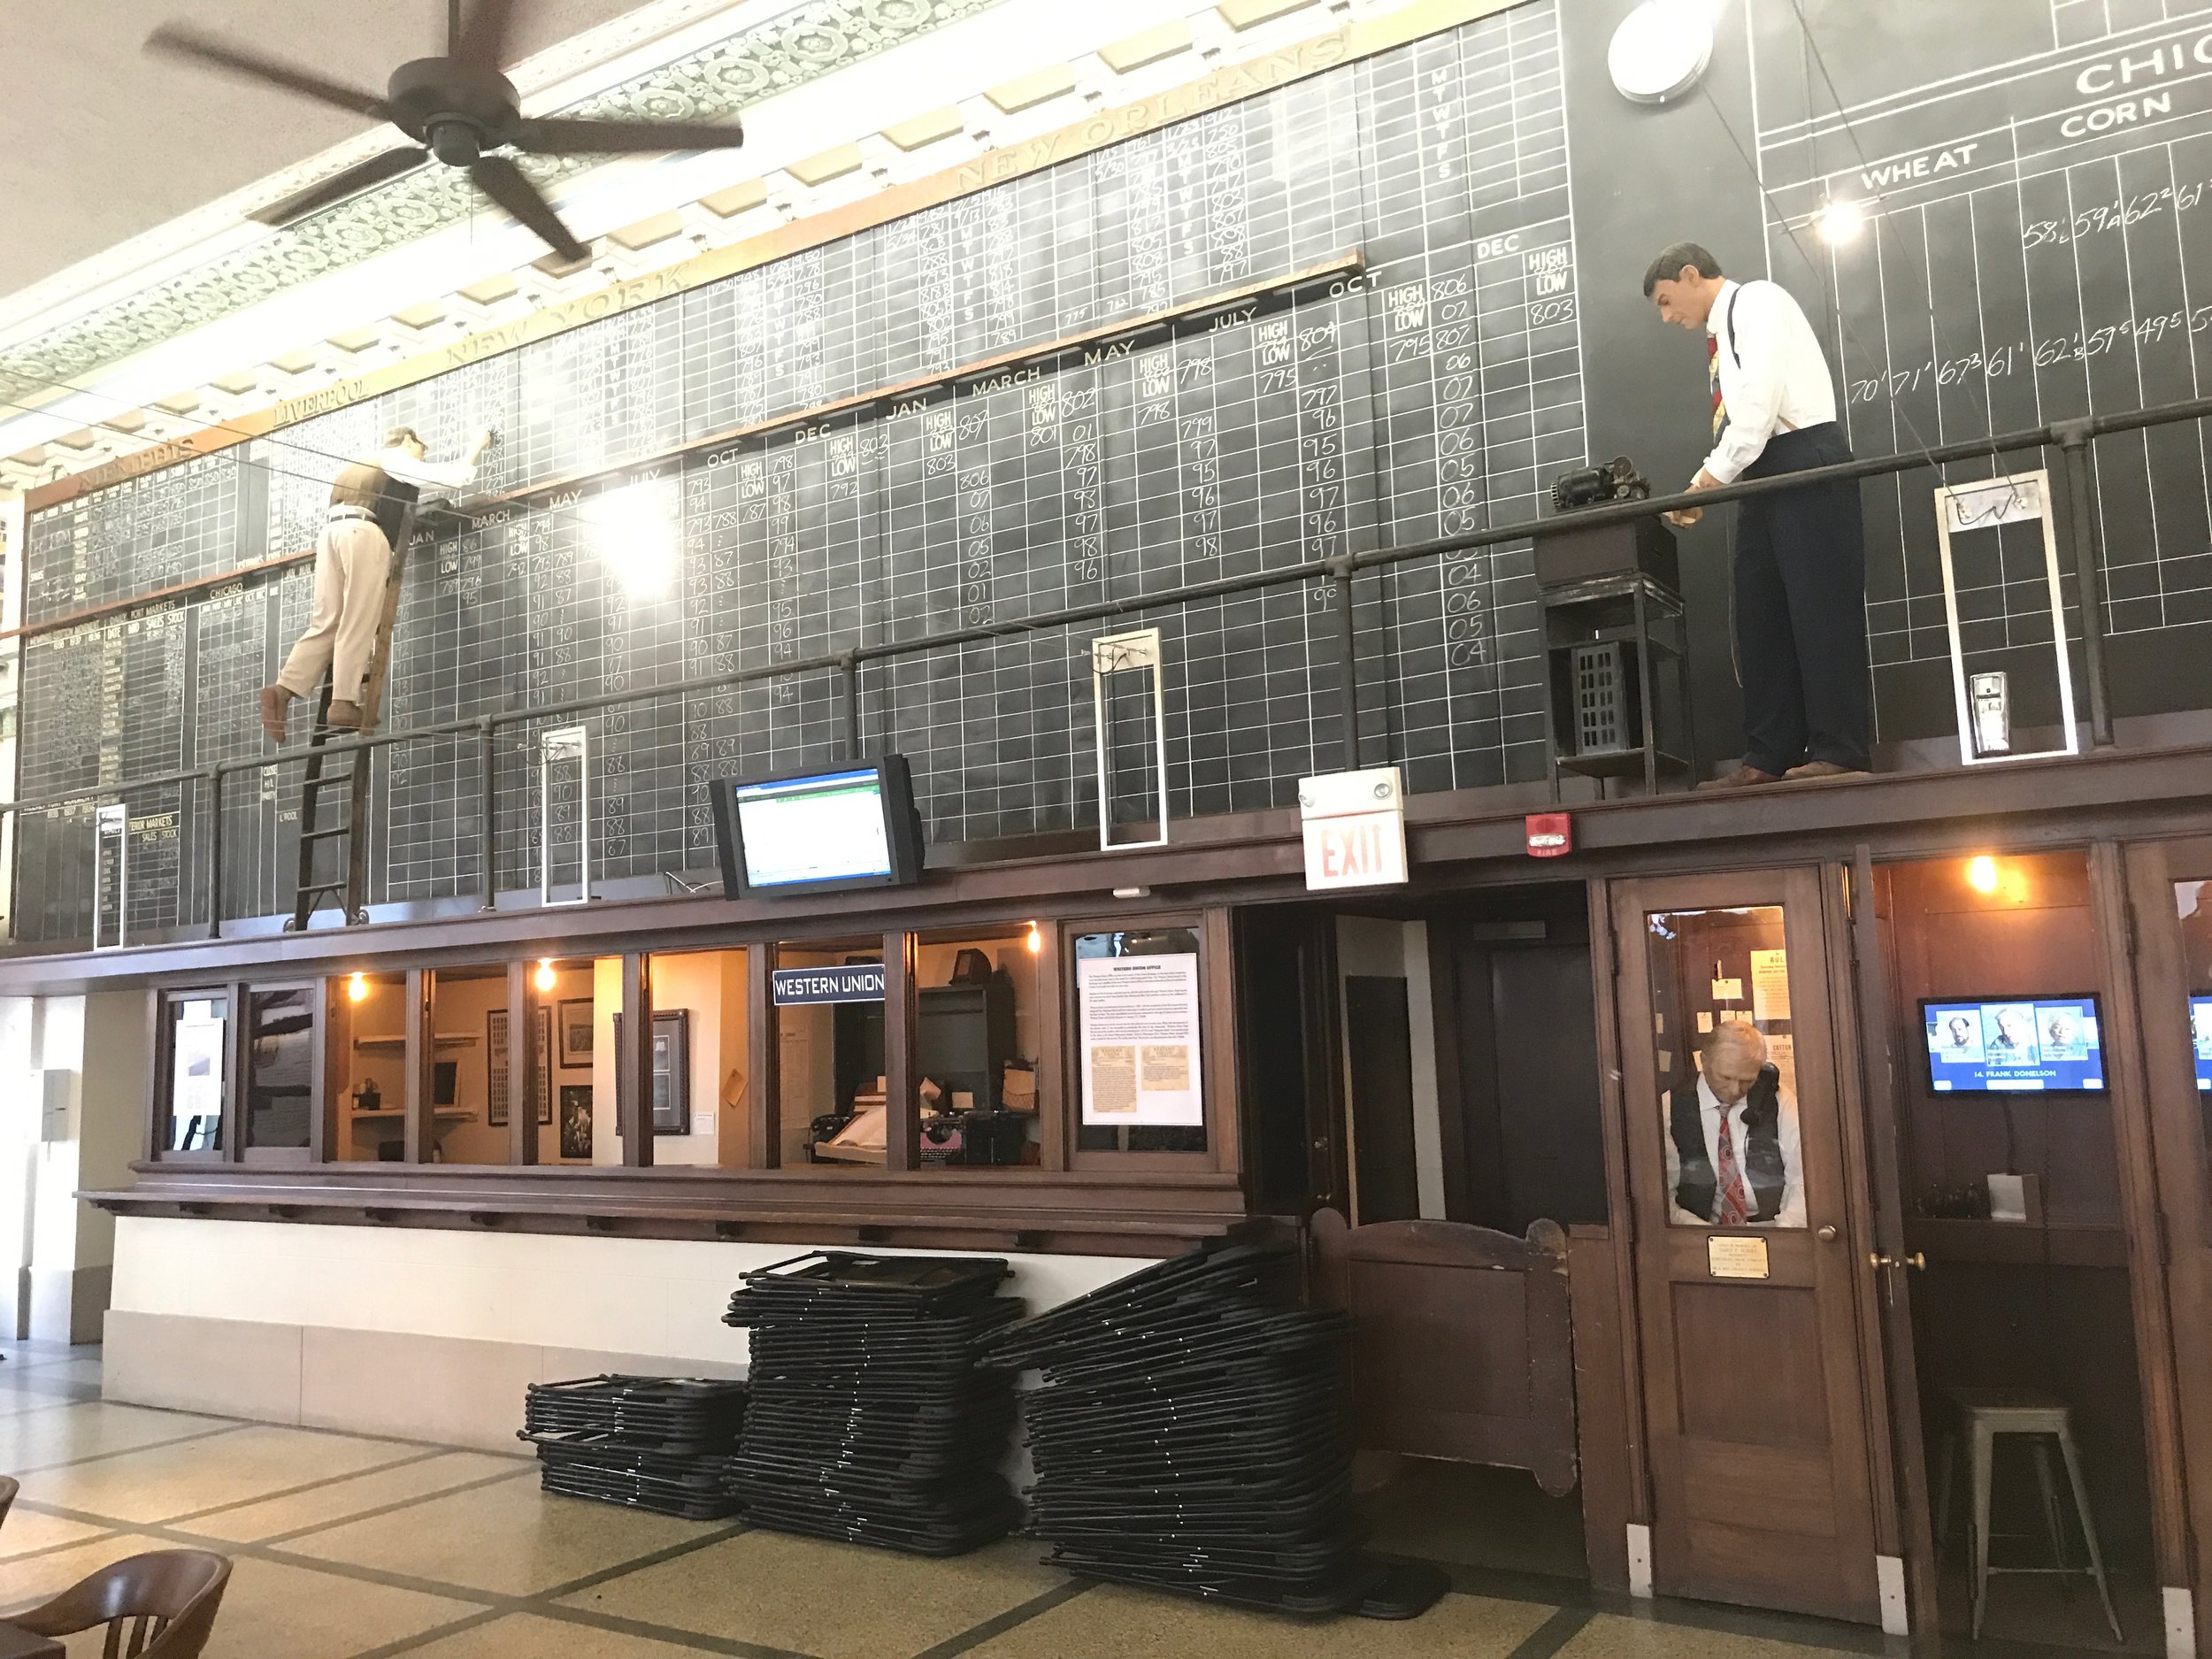  Computers have replaced the chalkboard on which trades were posted at the Memphis Cotton Exchange. 